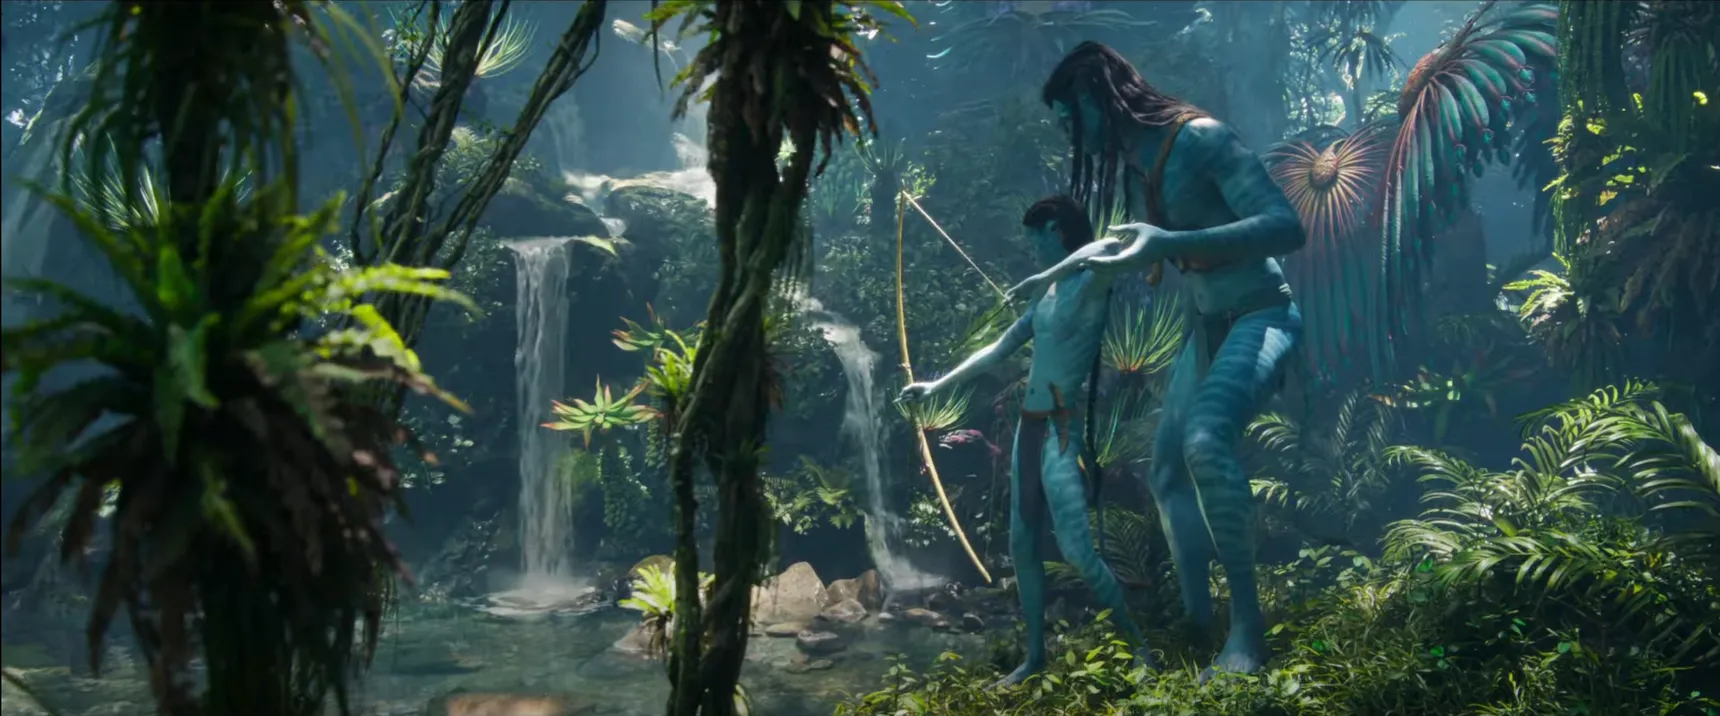 Even the trailers for Avatar 2 are designed specifically for the large screen